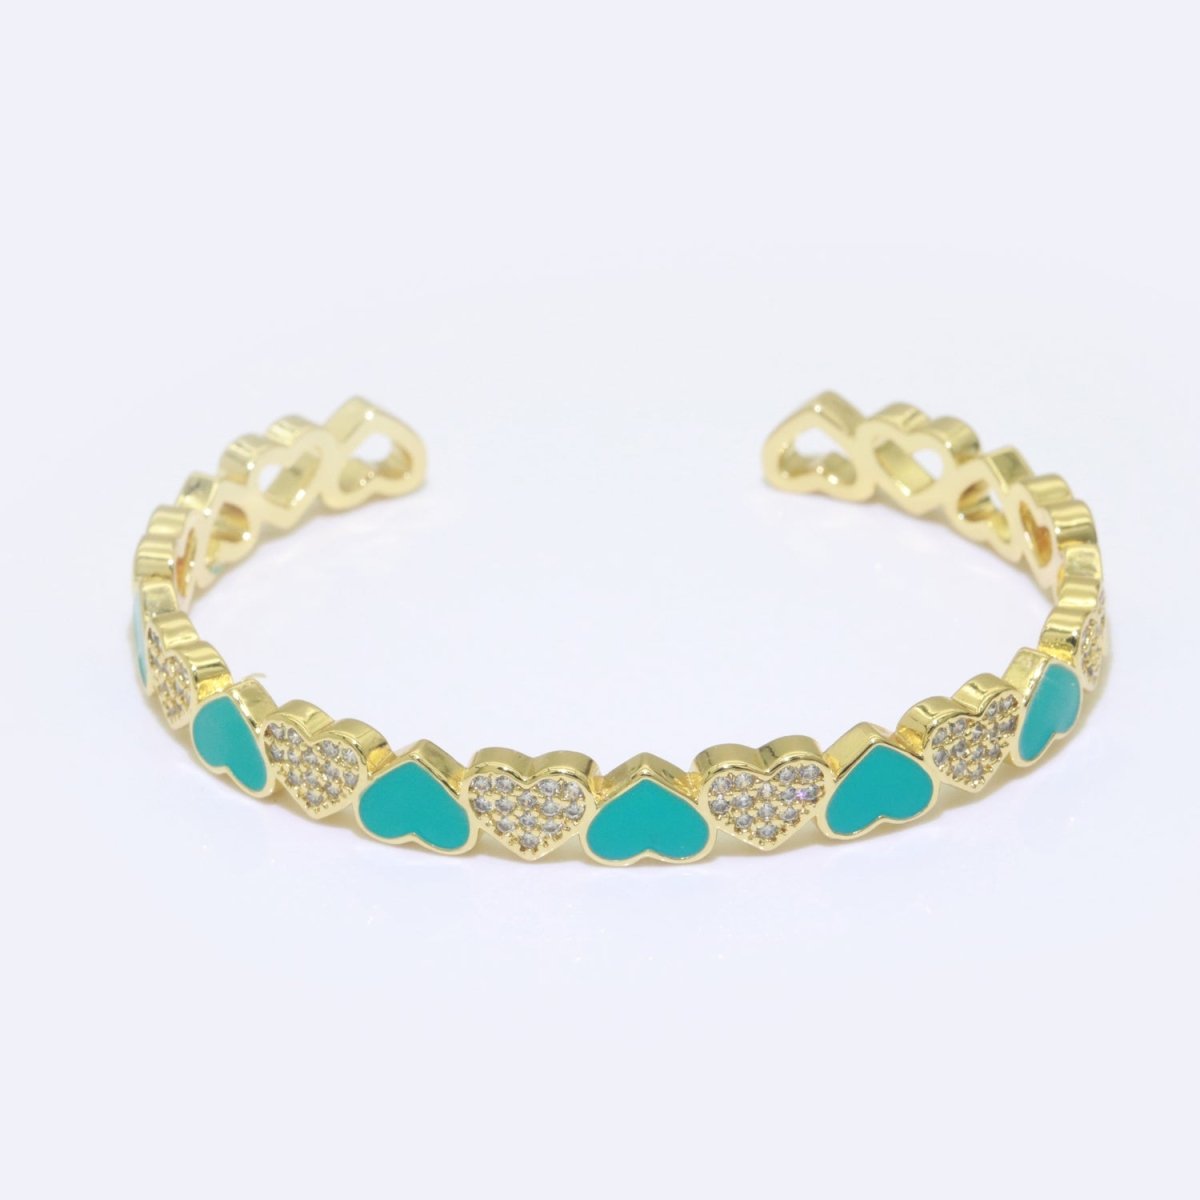 Teal Heart Enamel 14k Gold Filled Adjustable Bangle, Gold Cuff Bangle Bracelet Micro Pave Jewelry - DLUXCA